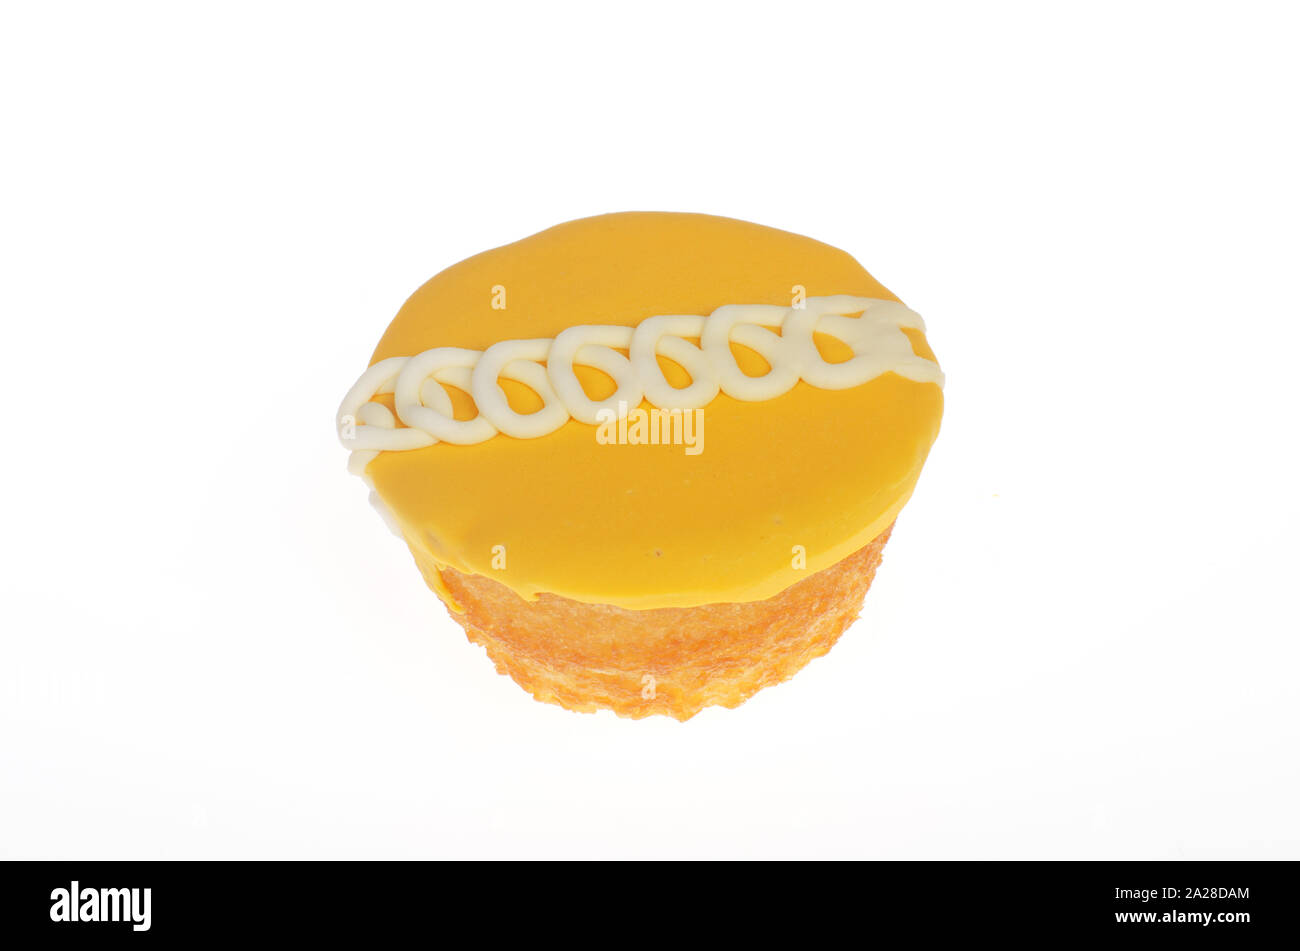 Hostess Frosted Orange Flavor creme filled cupcake Stock Photo